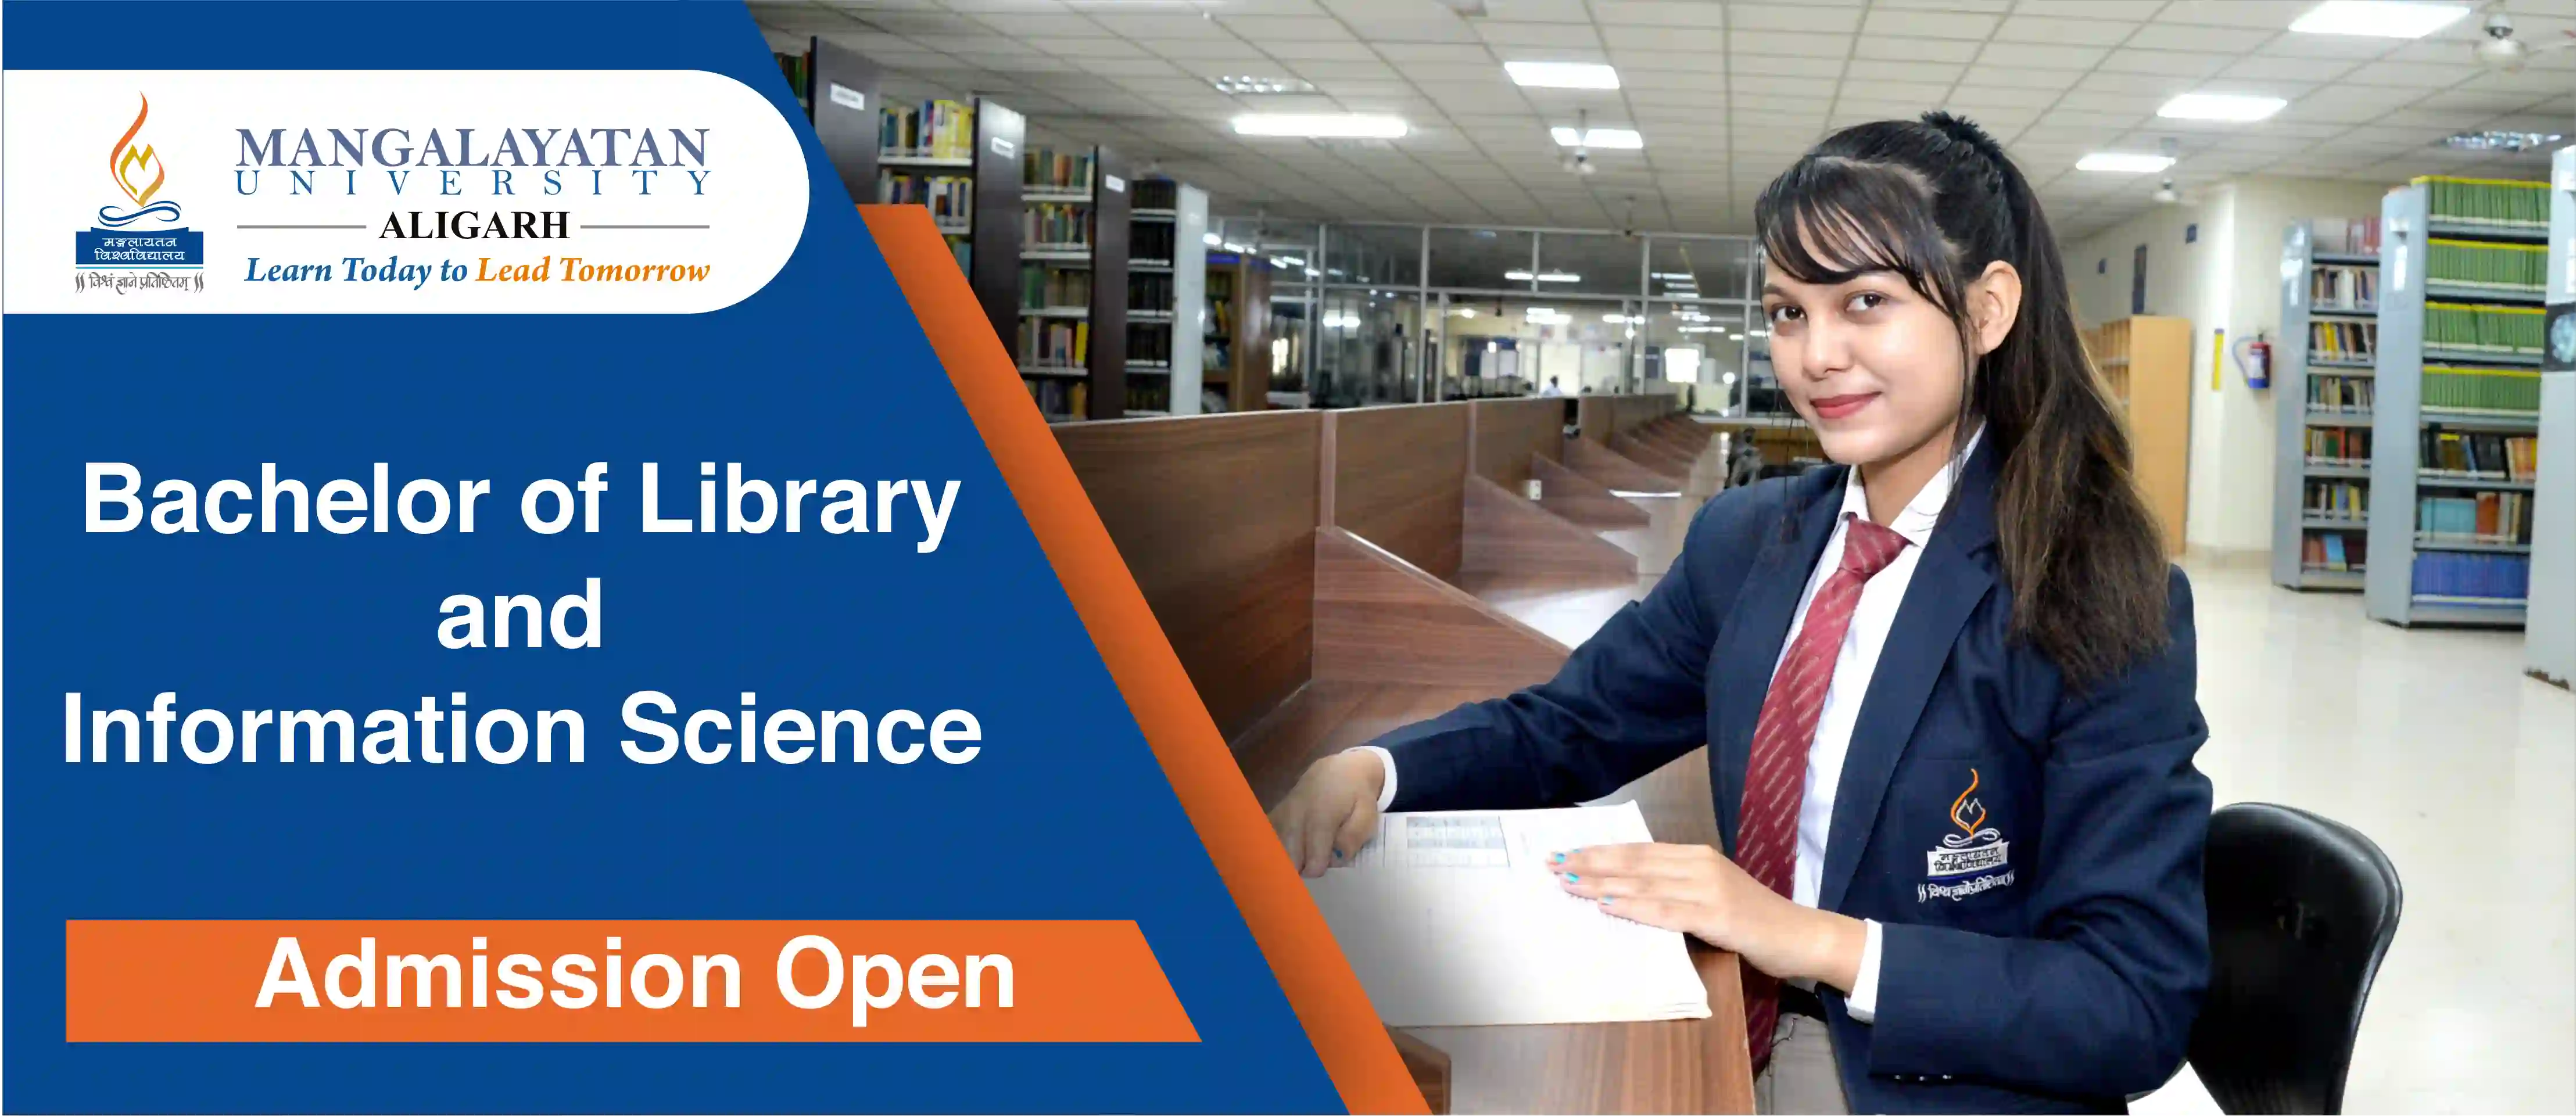 Bachelor of Library and Information Science Admission